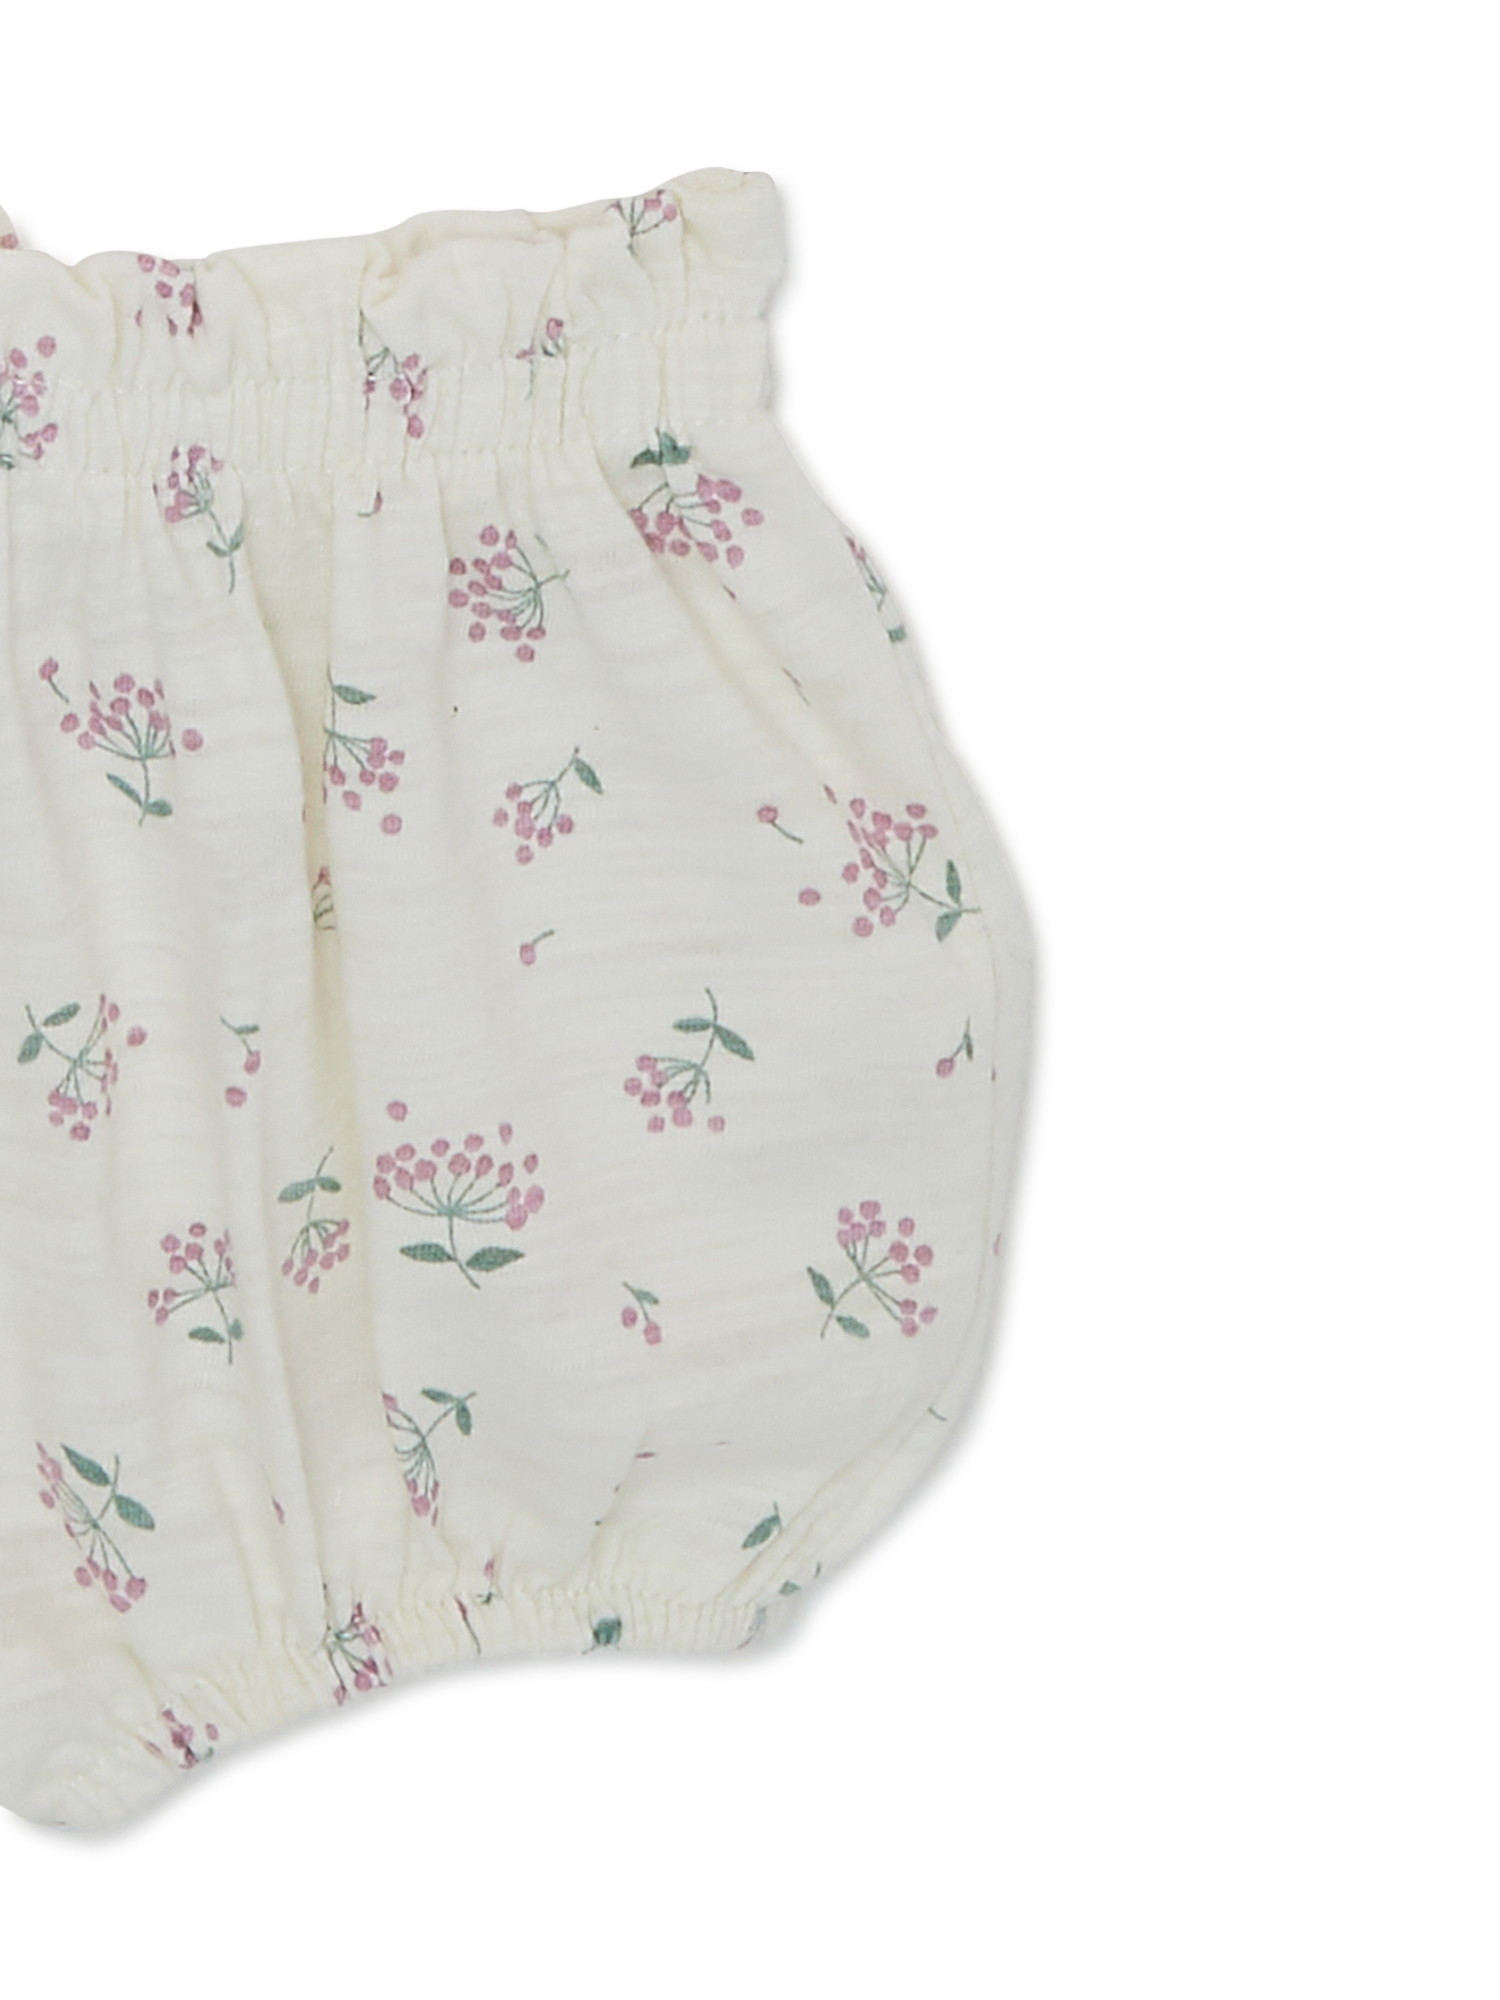 easy-peasy Baby Girls Print Dress and Diaper Cover, Sizes 0-24 Months - image 3 of 6